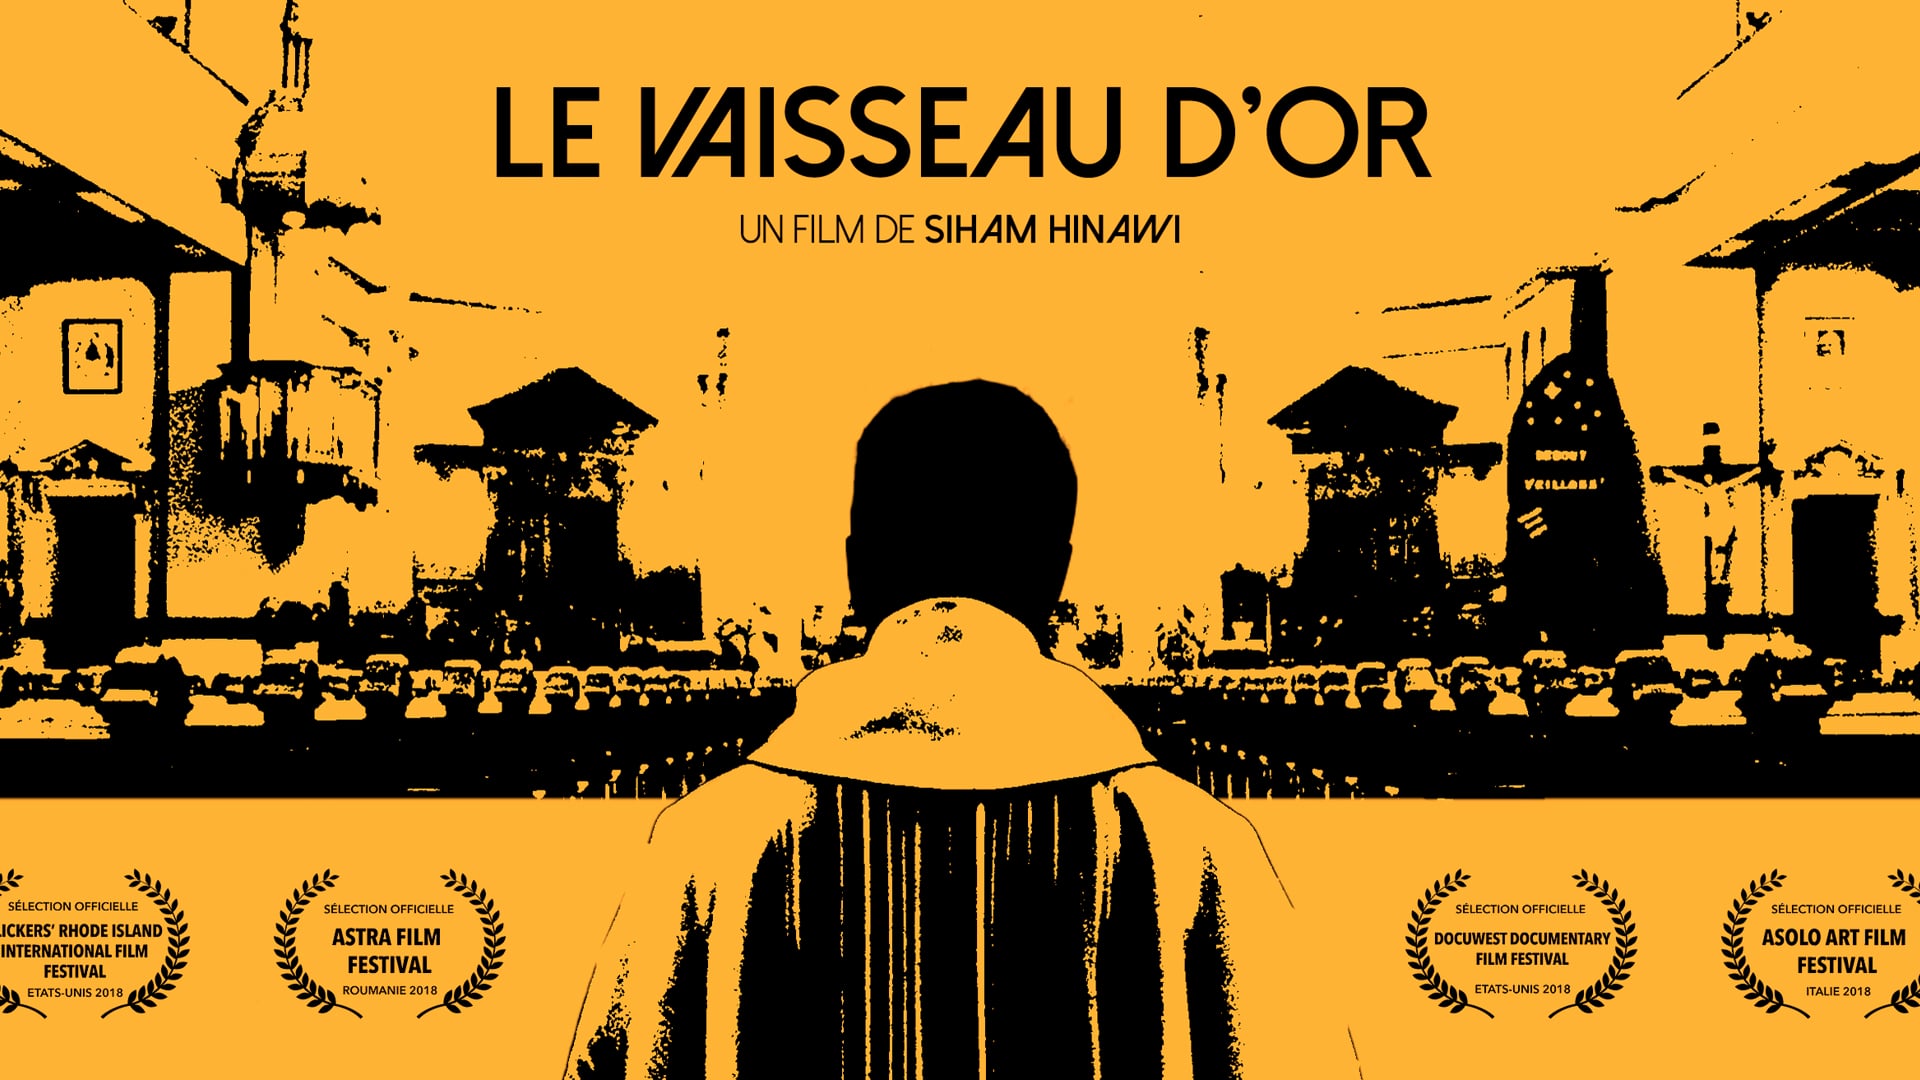 *Trailer* LE VAISSEAU D'OR [THE SHIP OF GOLD] | Siham Hinawi | © INSAS 2017